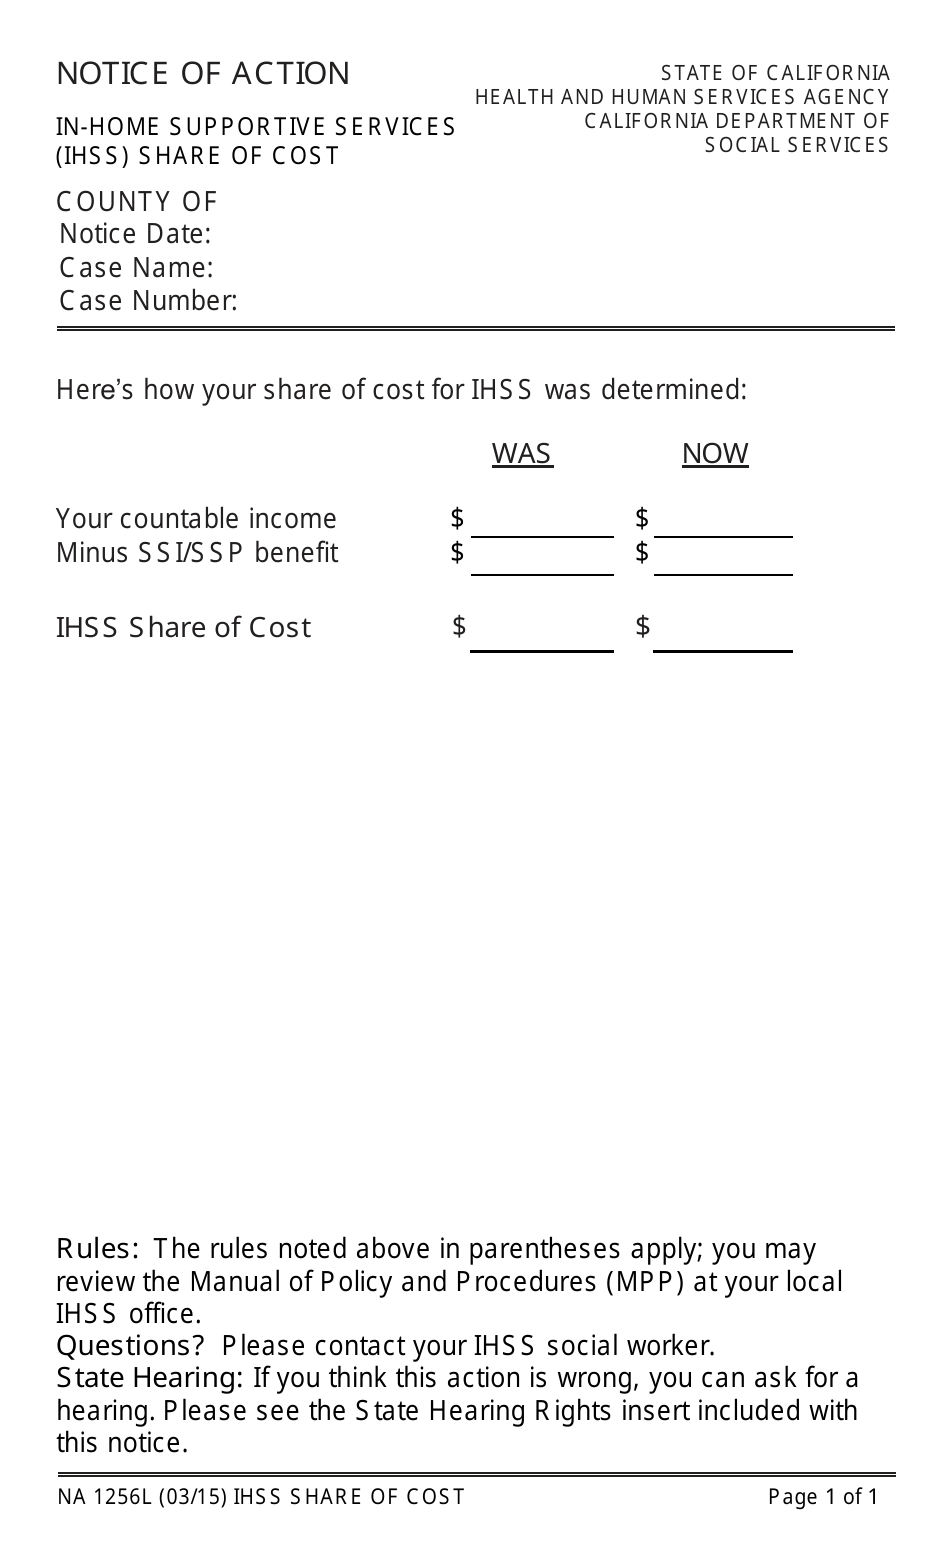 Form NA1256L Notice of Action in-Home Supportive Services (Ihss) Share of Cost - California, Page 1